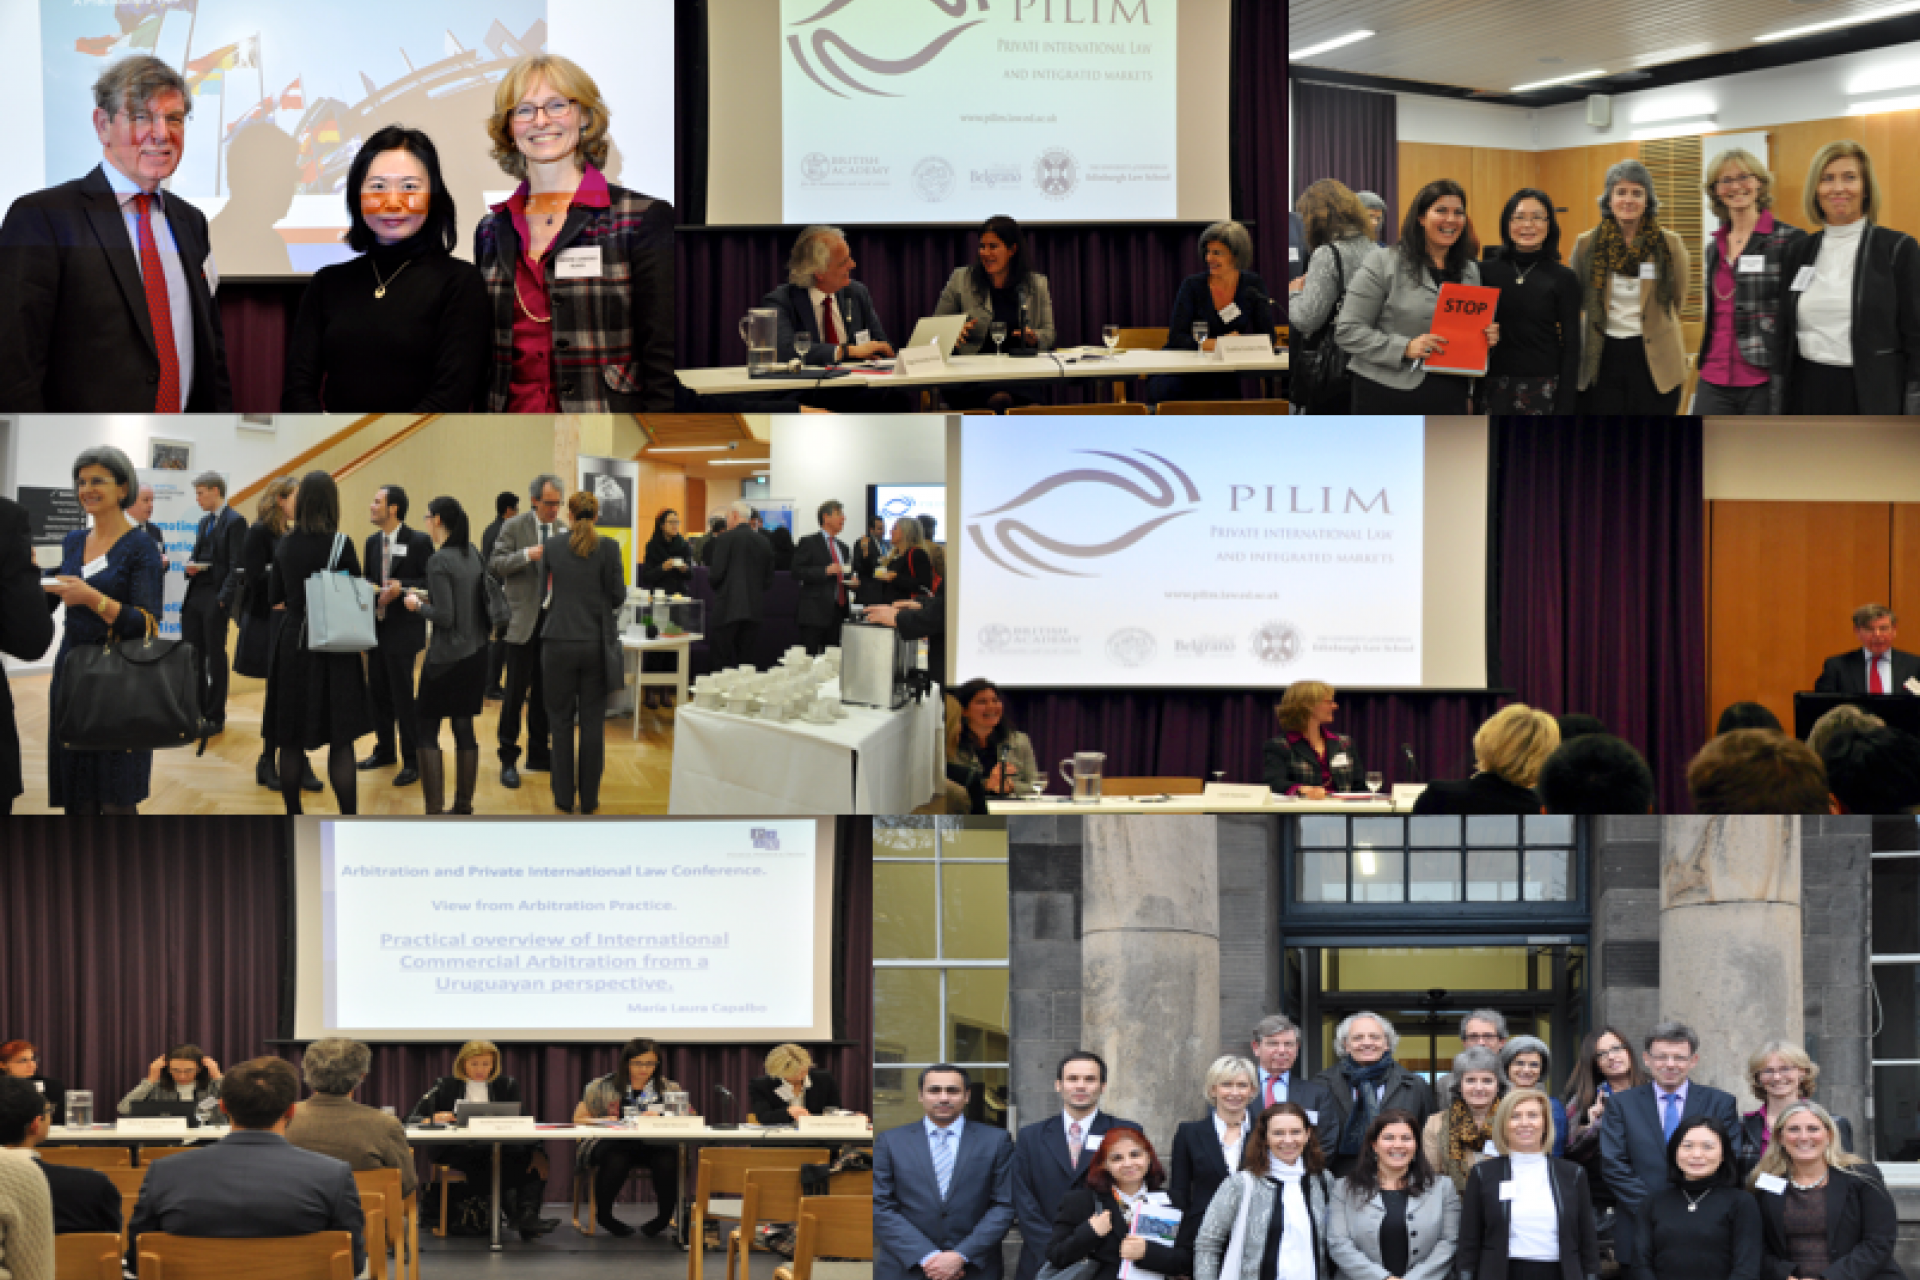 top left: The Rt. Hon. Lord Hamilton with Prof. Sophia Tang and Dr. Simone Lamont-Black; top centre: the Keynote Debate; top left: Dr. Veronica Ruiz Abou-Nigm with Prof. Sophia Tang, Prof. Yvonne Baatz, Dr. Simone Lamont-Black and Prof. Cecilia Fresnedo de Aguirre; centre left: ongoing discussions during coffee break; centre left: The Rt. Hon. Lord Hamilton delivering his presentation during session one; bottom left: the session 2 panelists; bottom right: some of the conference speakers outside the EECI